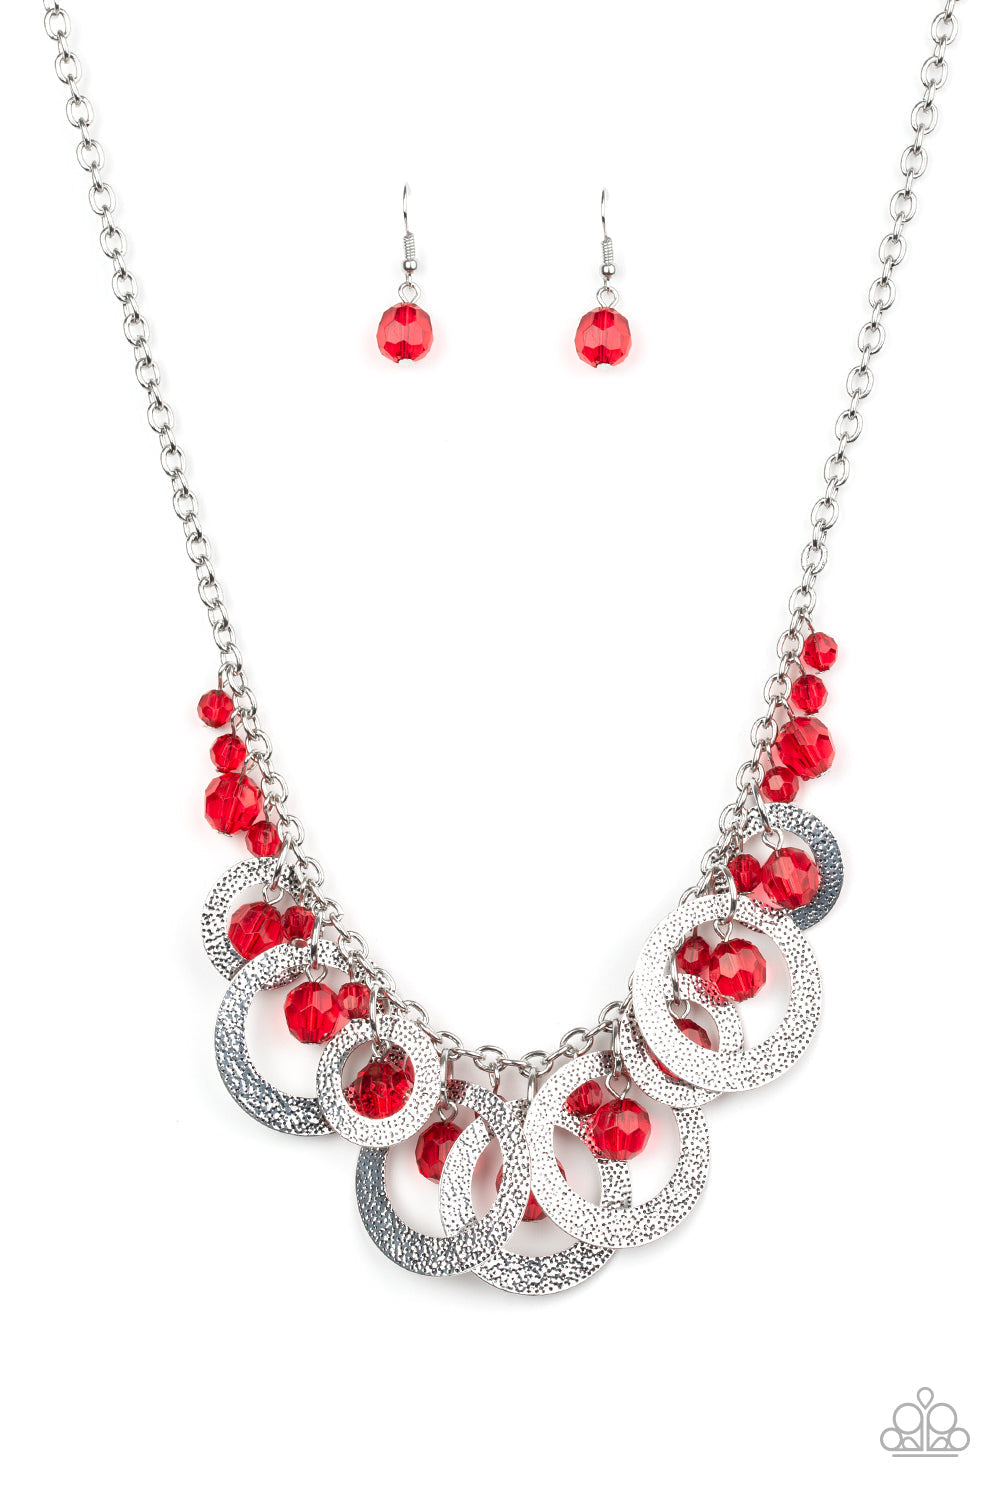 Turn It Up - Red and Silver Necklace - Paparazzi Accessories - Shorter Necklaces Bejeweled Accessories By Kristie Featuring Paparazzi Jewelry - Trendy fashion jewelry for everyone -A collection of Samba crystal-like beads and hammered silver hoops dangle from the bottom of a shimmery silver chain, creating a noise-making fringe. Features an adjustable clasp closure necklace.